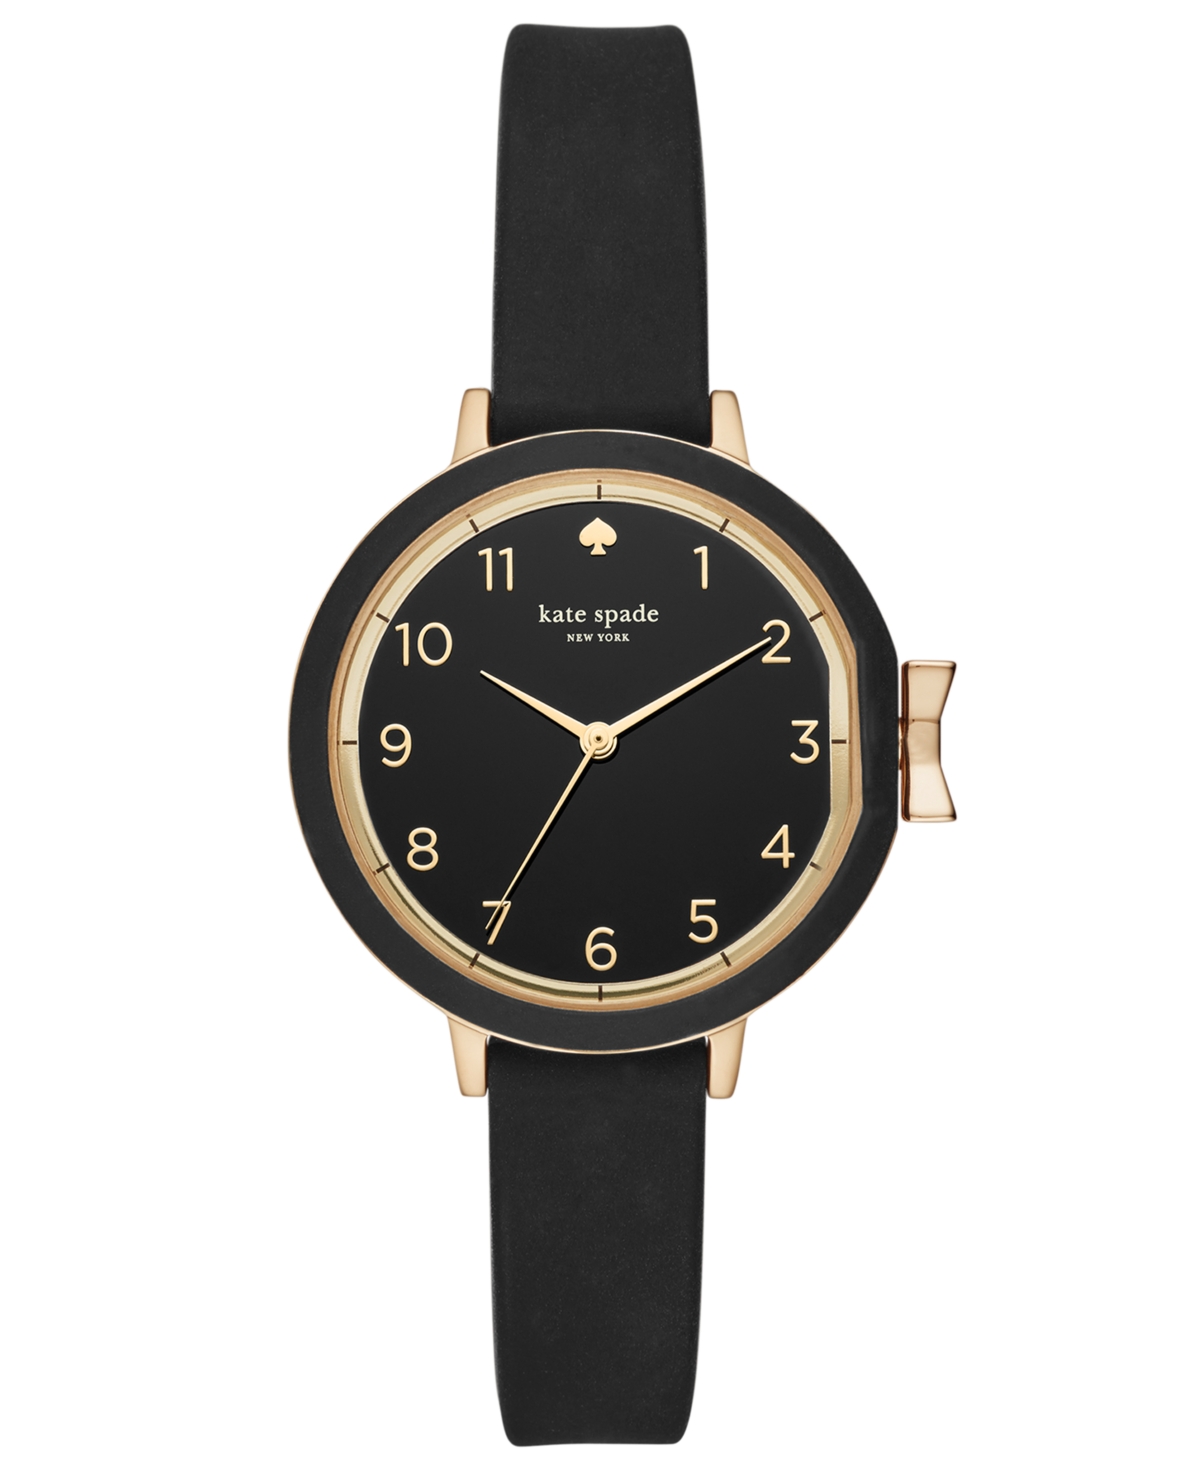 kate spade new york Women's Park Row Black Silicone Strap Watch 34mm &  Reviews - All Watches - Jewelry & Watches - Macy's